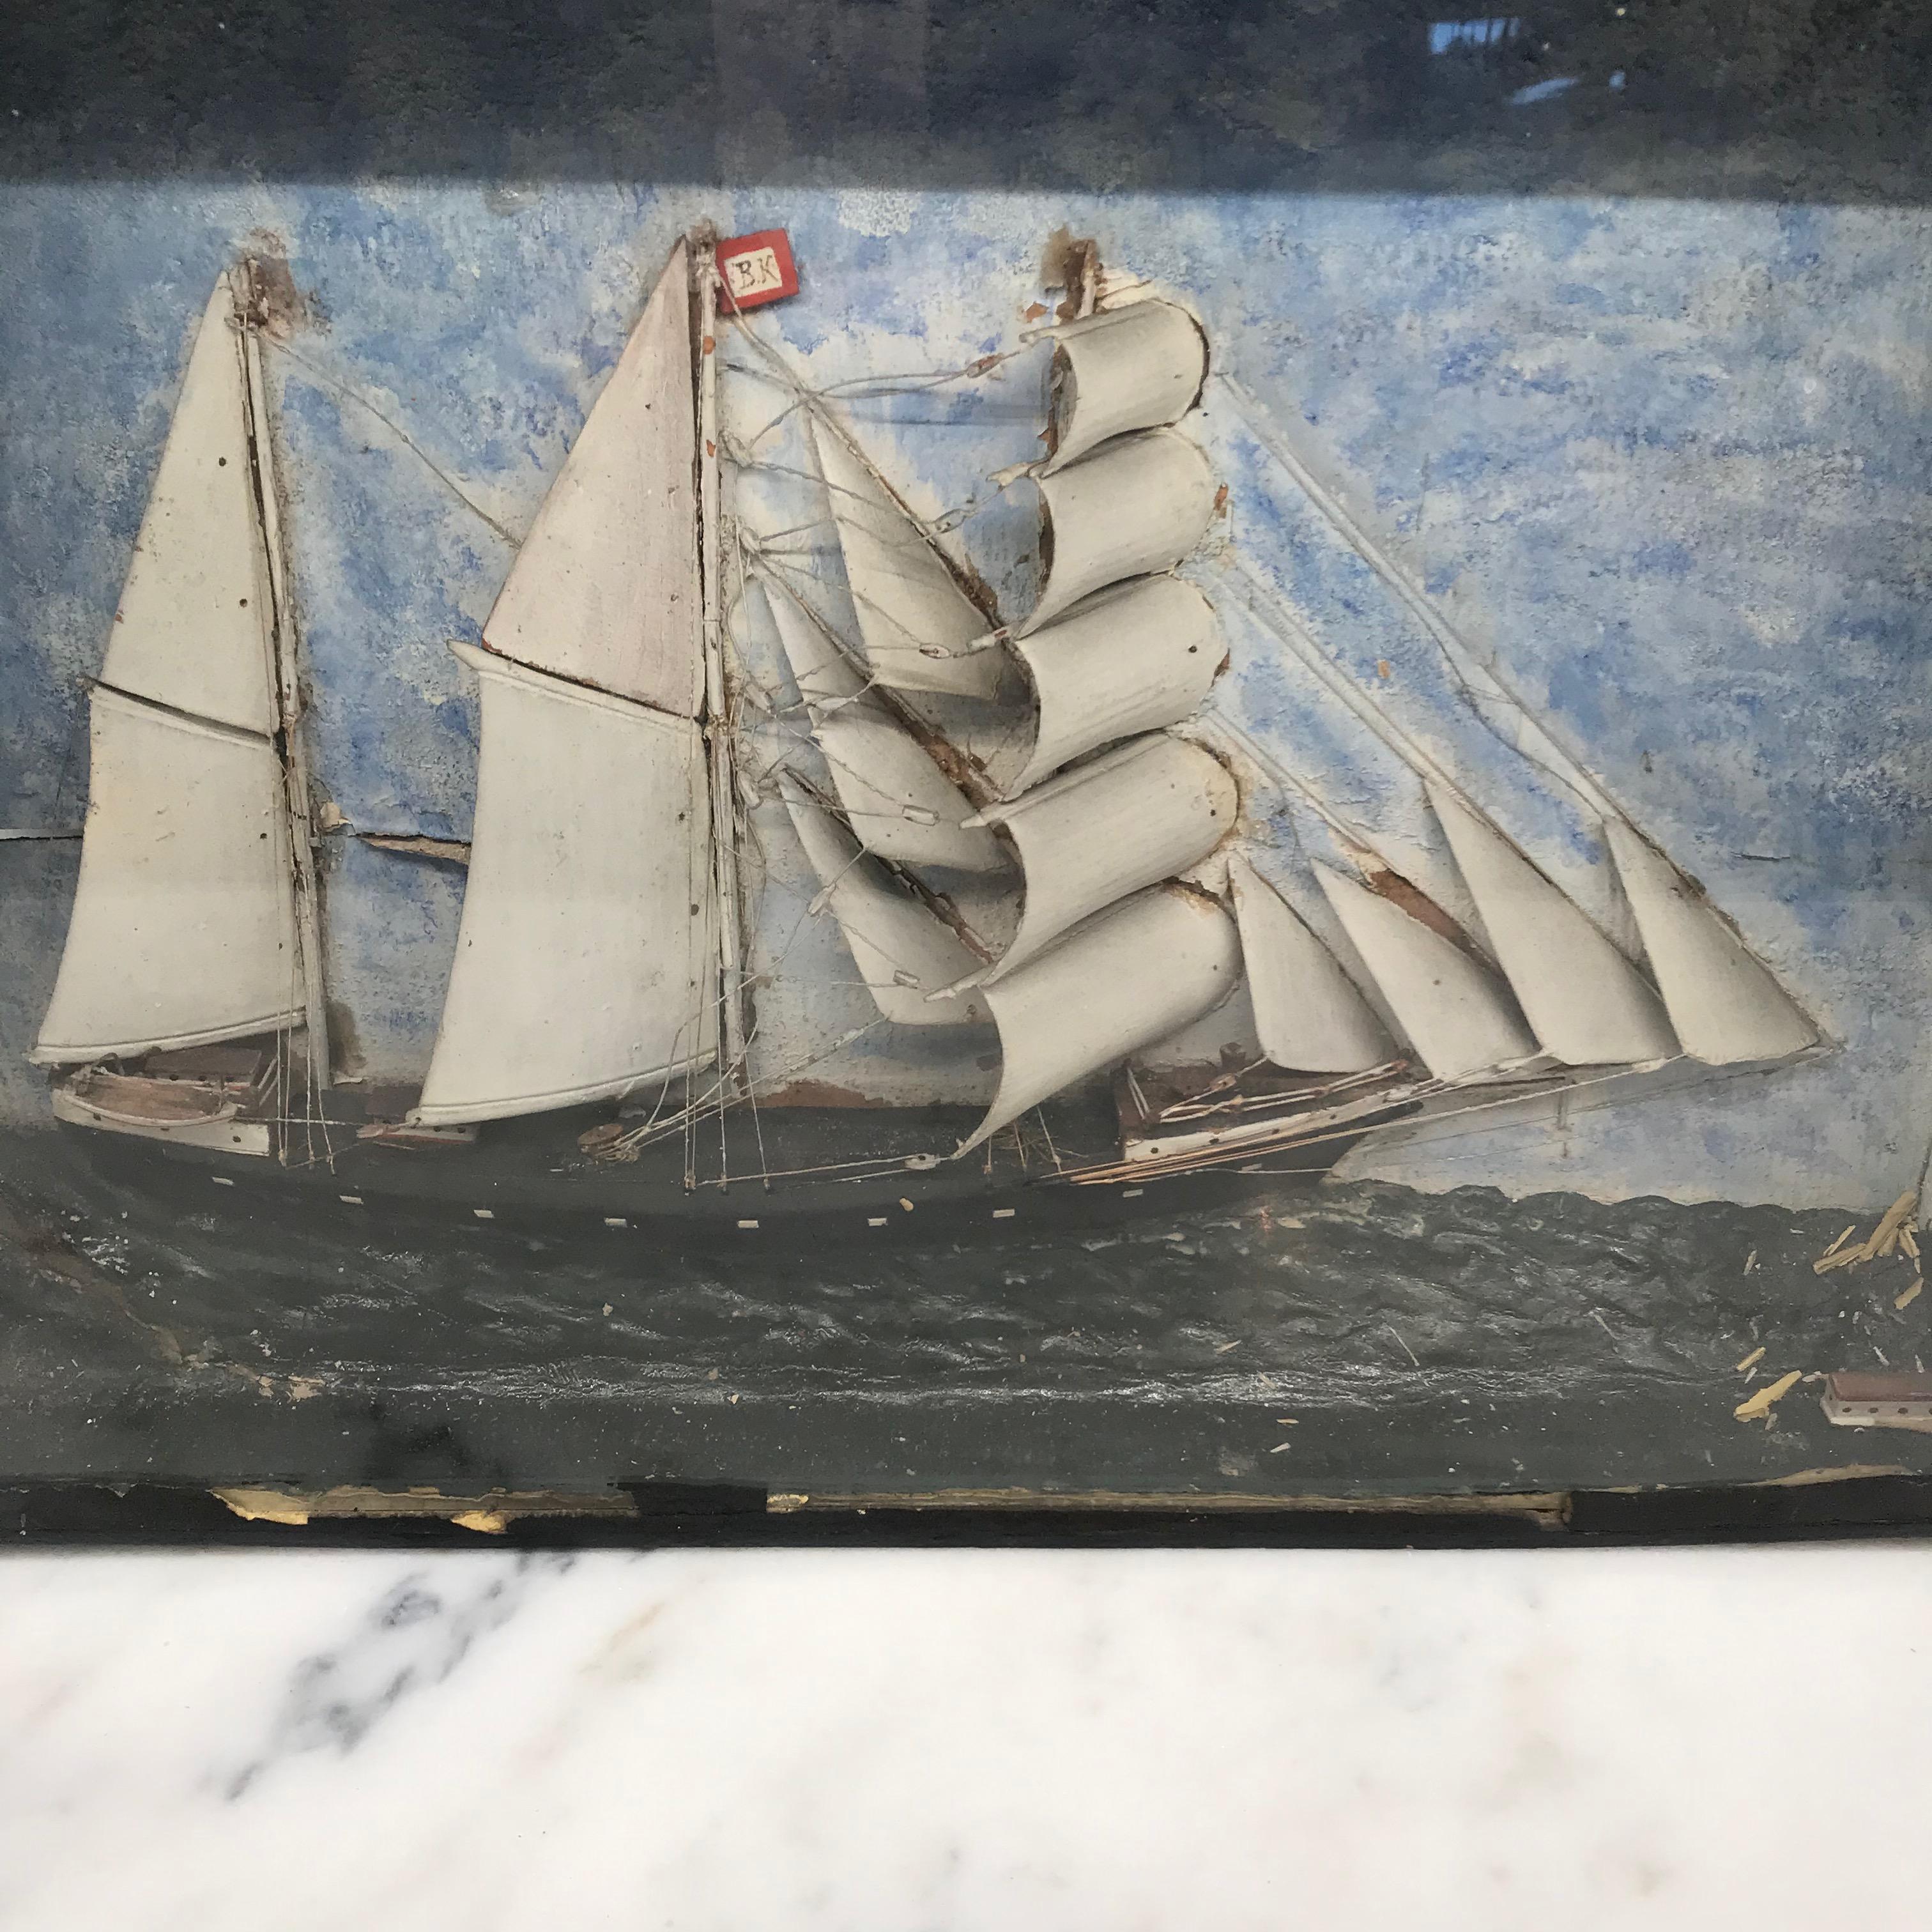 Early 19th century diorama of a three masted ship in full sail in a choppy sea of white-capped white waves amidst blue skies. In original framed glass shadow box.
#4293.

   